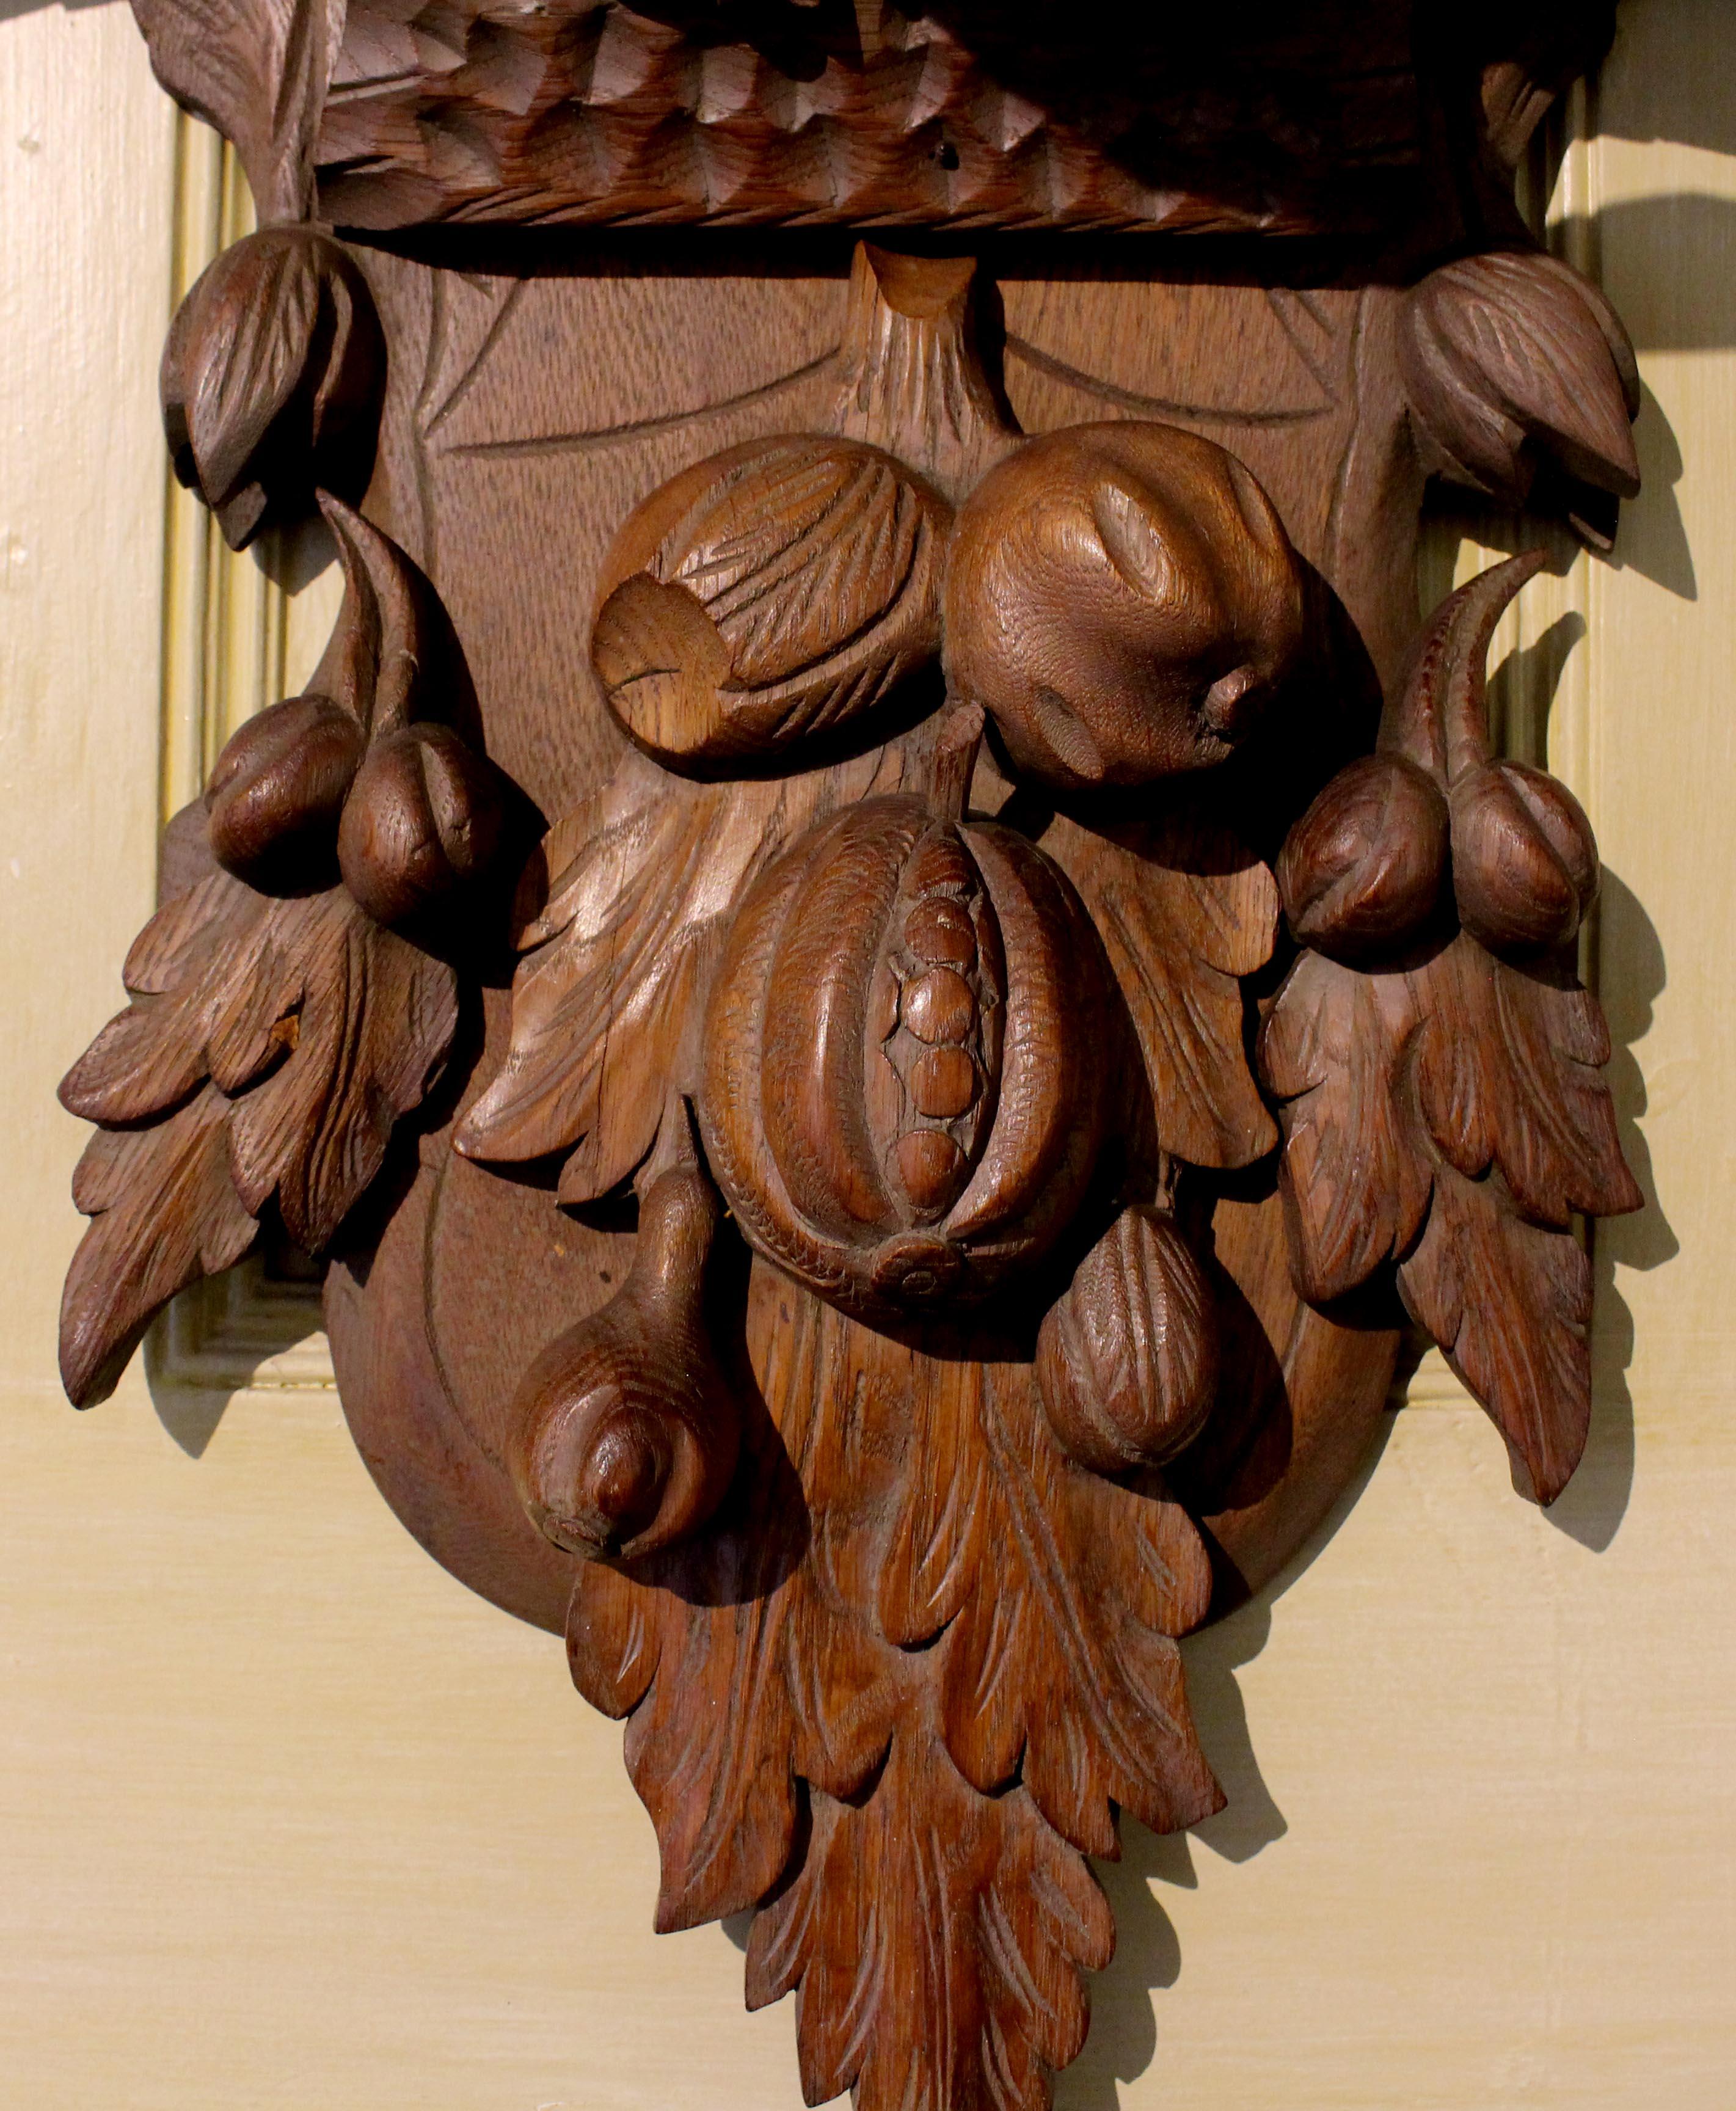 Circa 1860-1880 Black Forest Carved Eagle Wall Shelf In Good Condition For Sale In Chapel Hill, NC